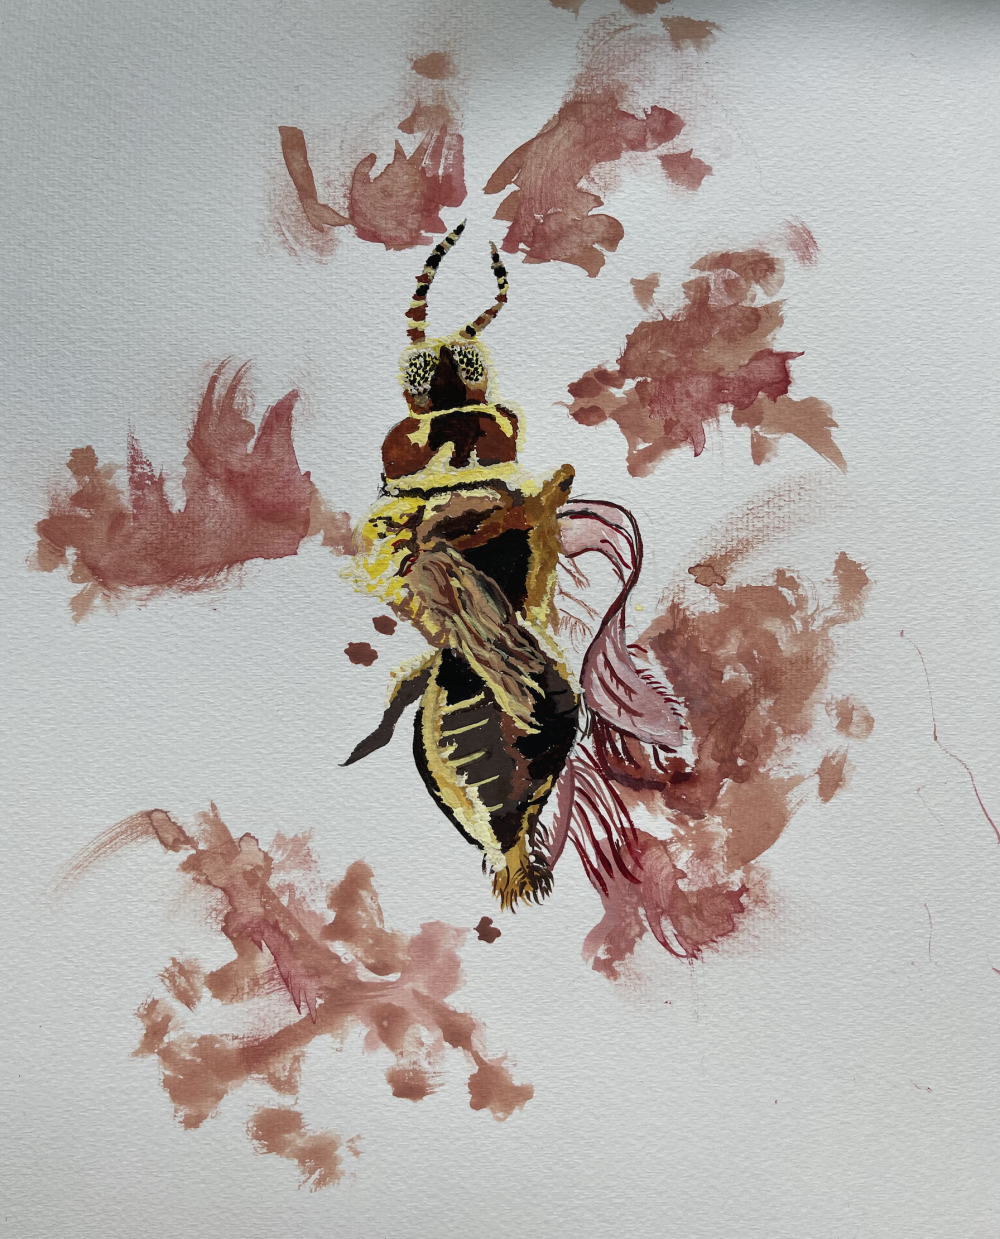 8. Liz Farell, “Thrips Setosus, Japanese Flower Thrips," 2022, Watercolor on paper